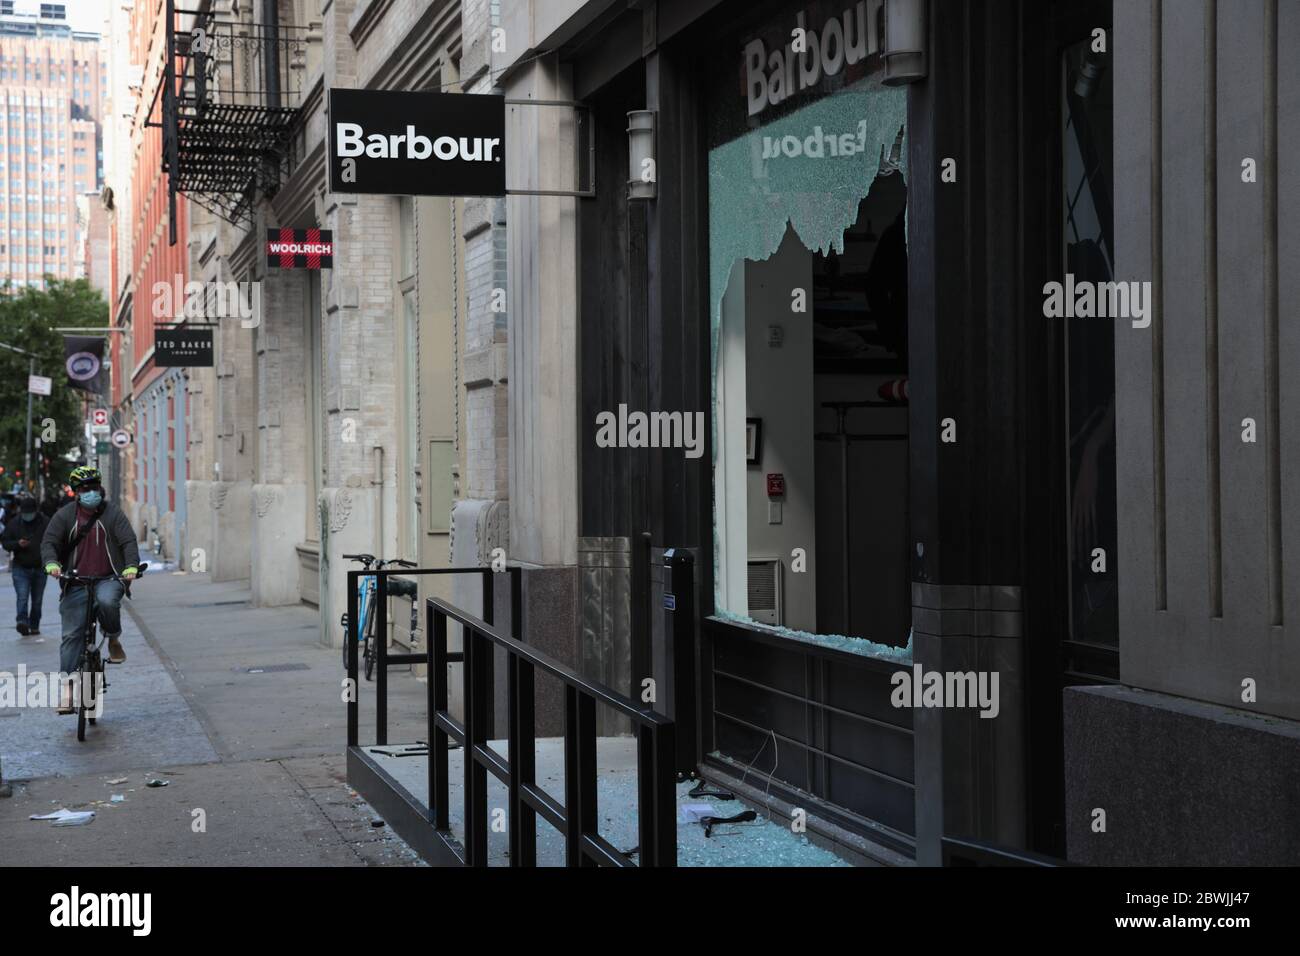 New York, NY, USA - June 1, 2020: Windows of Barbour boutique on Wooster  Street smashed and stores looted after 2 nights of civil unrest Stock Photo  - Alamy